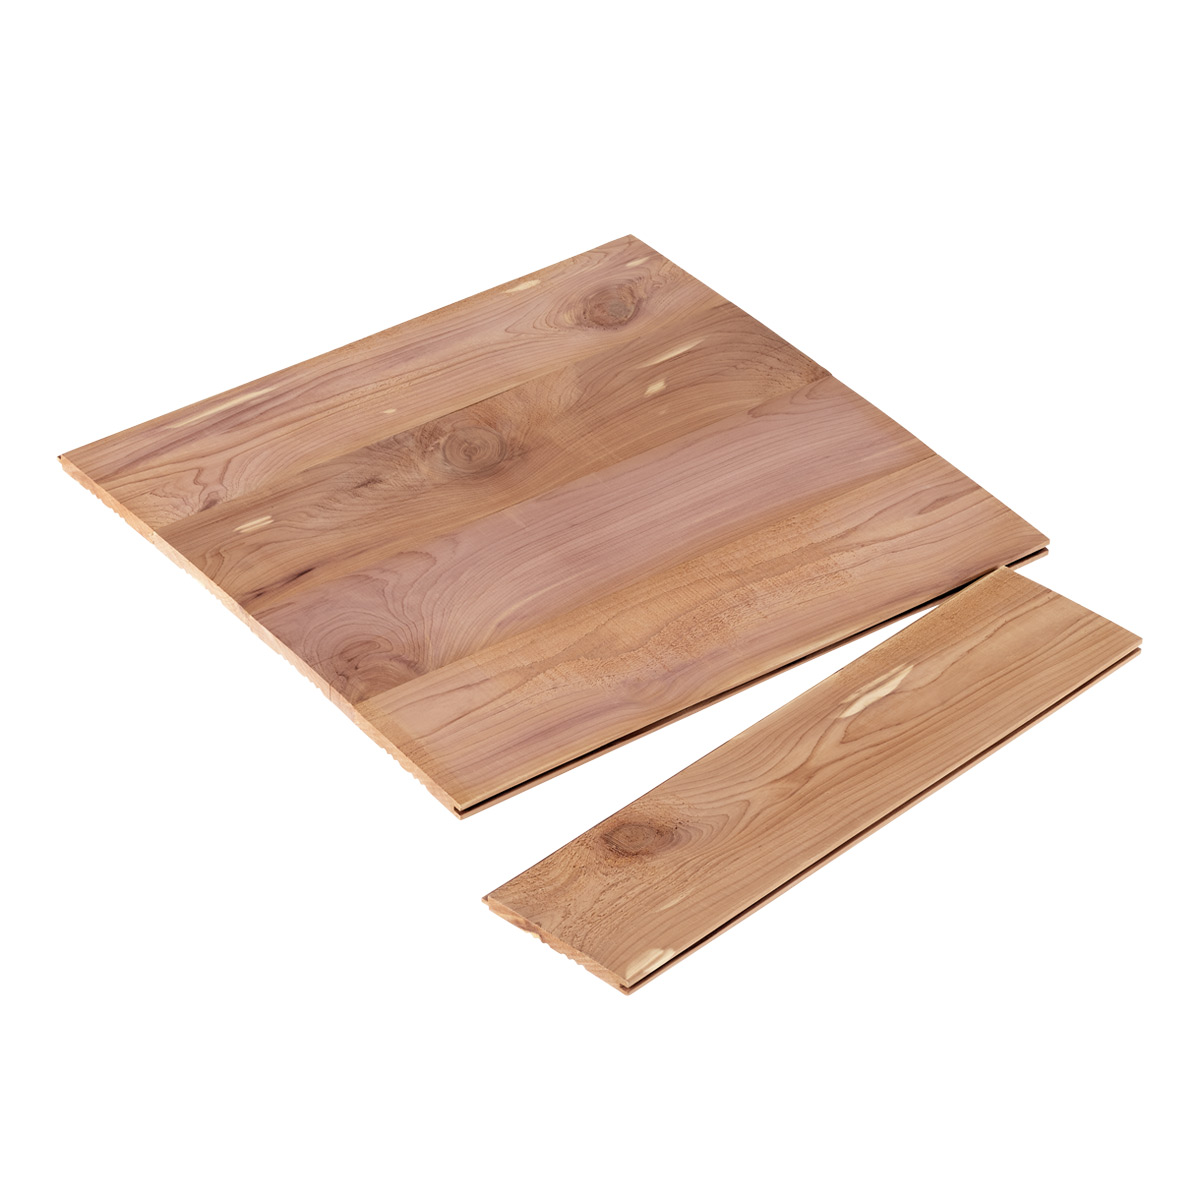 Cedar Drawer Liners Pkg/5, 13-1/2 x 3-1/2 x 3/8 H | The Container Store